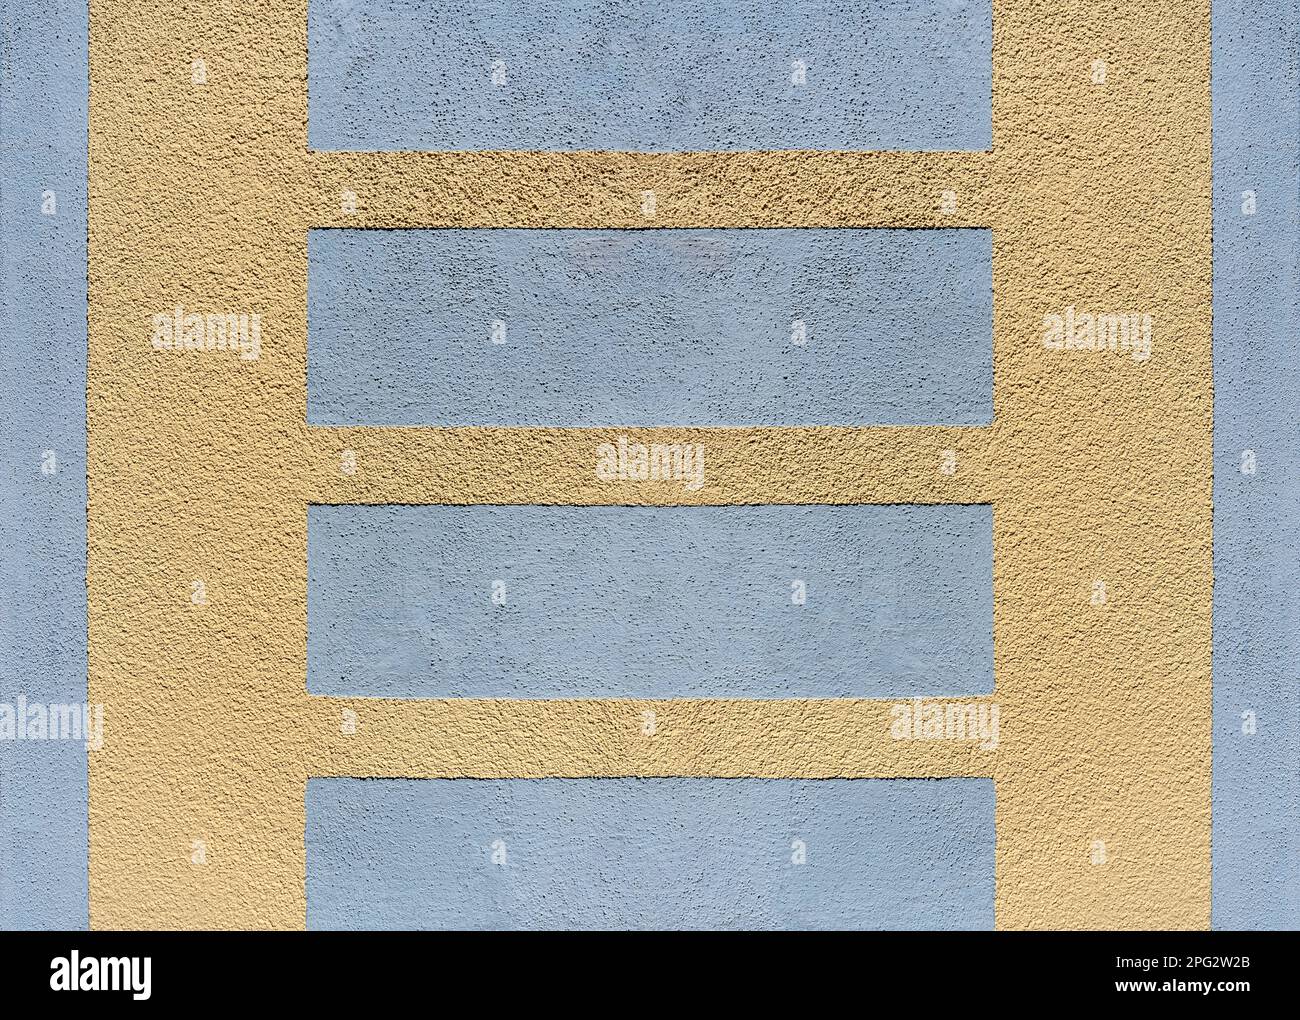 Two-tone pattern of blue rectangular areas in yellow grainy plaster Stock Photo